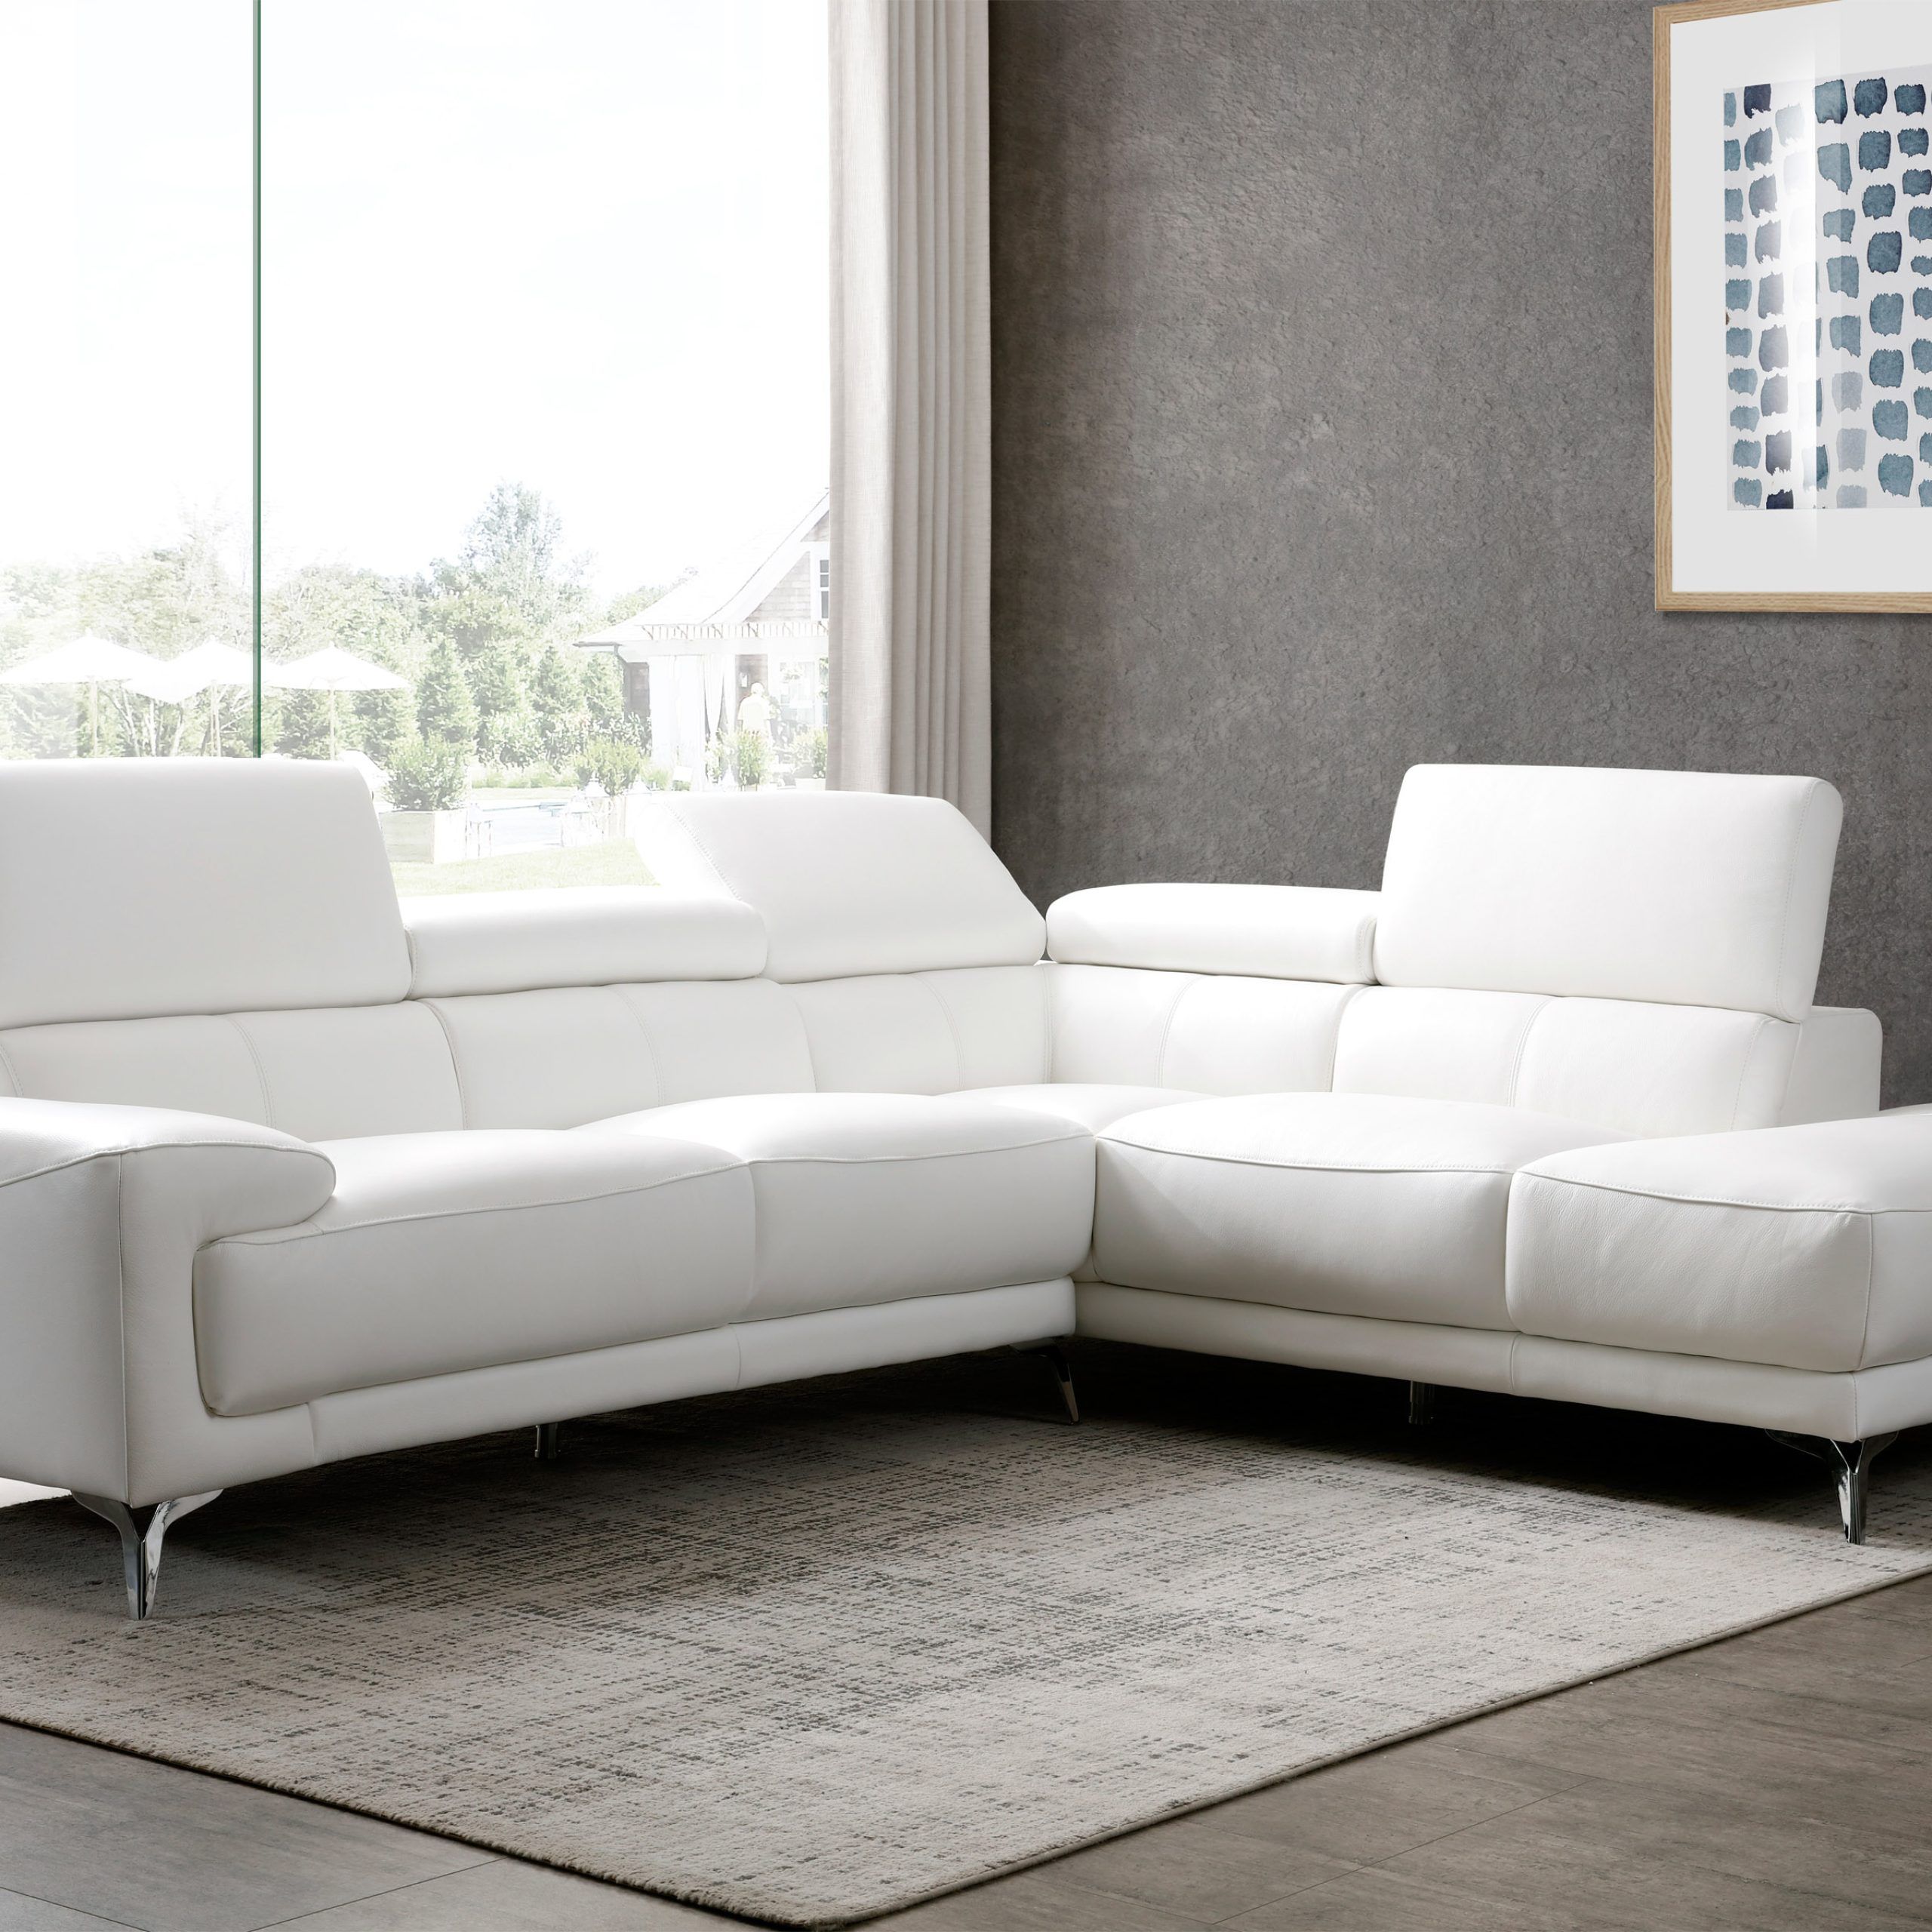 Advanced Adjustable Modern Leather L Shape Sectional Toledo Ohio Throughout Modern L Shaped Sofa Sectionals (View 2 of 20)